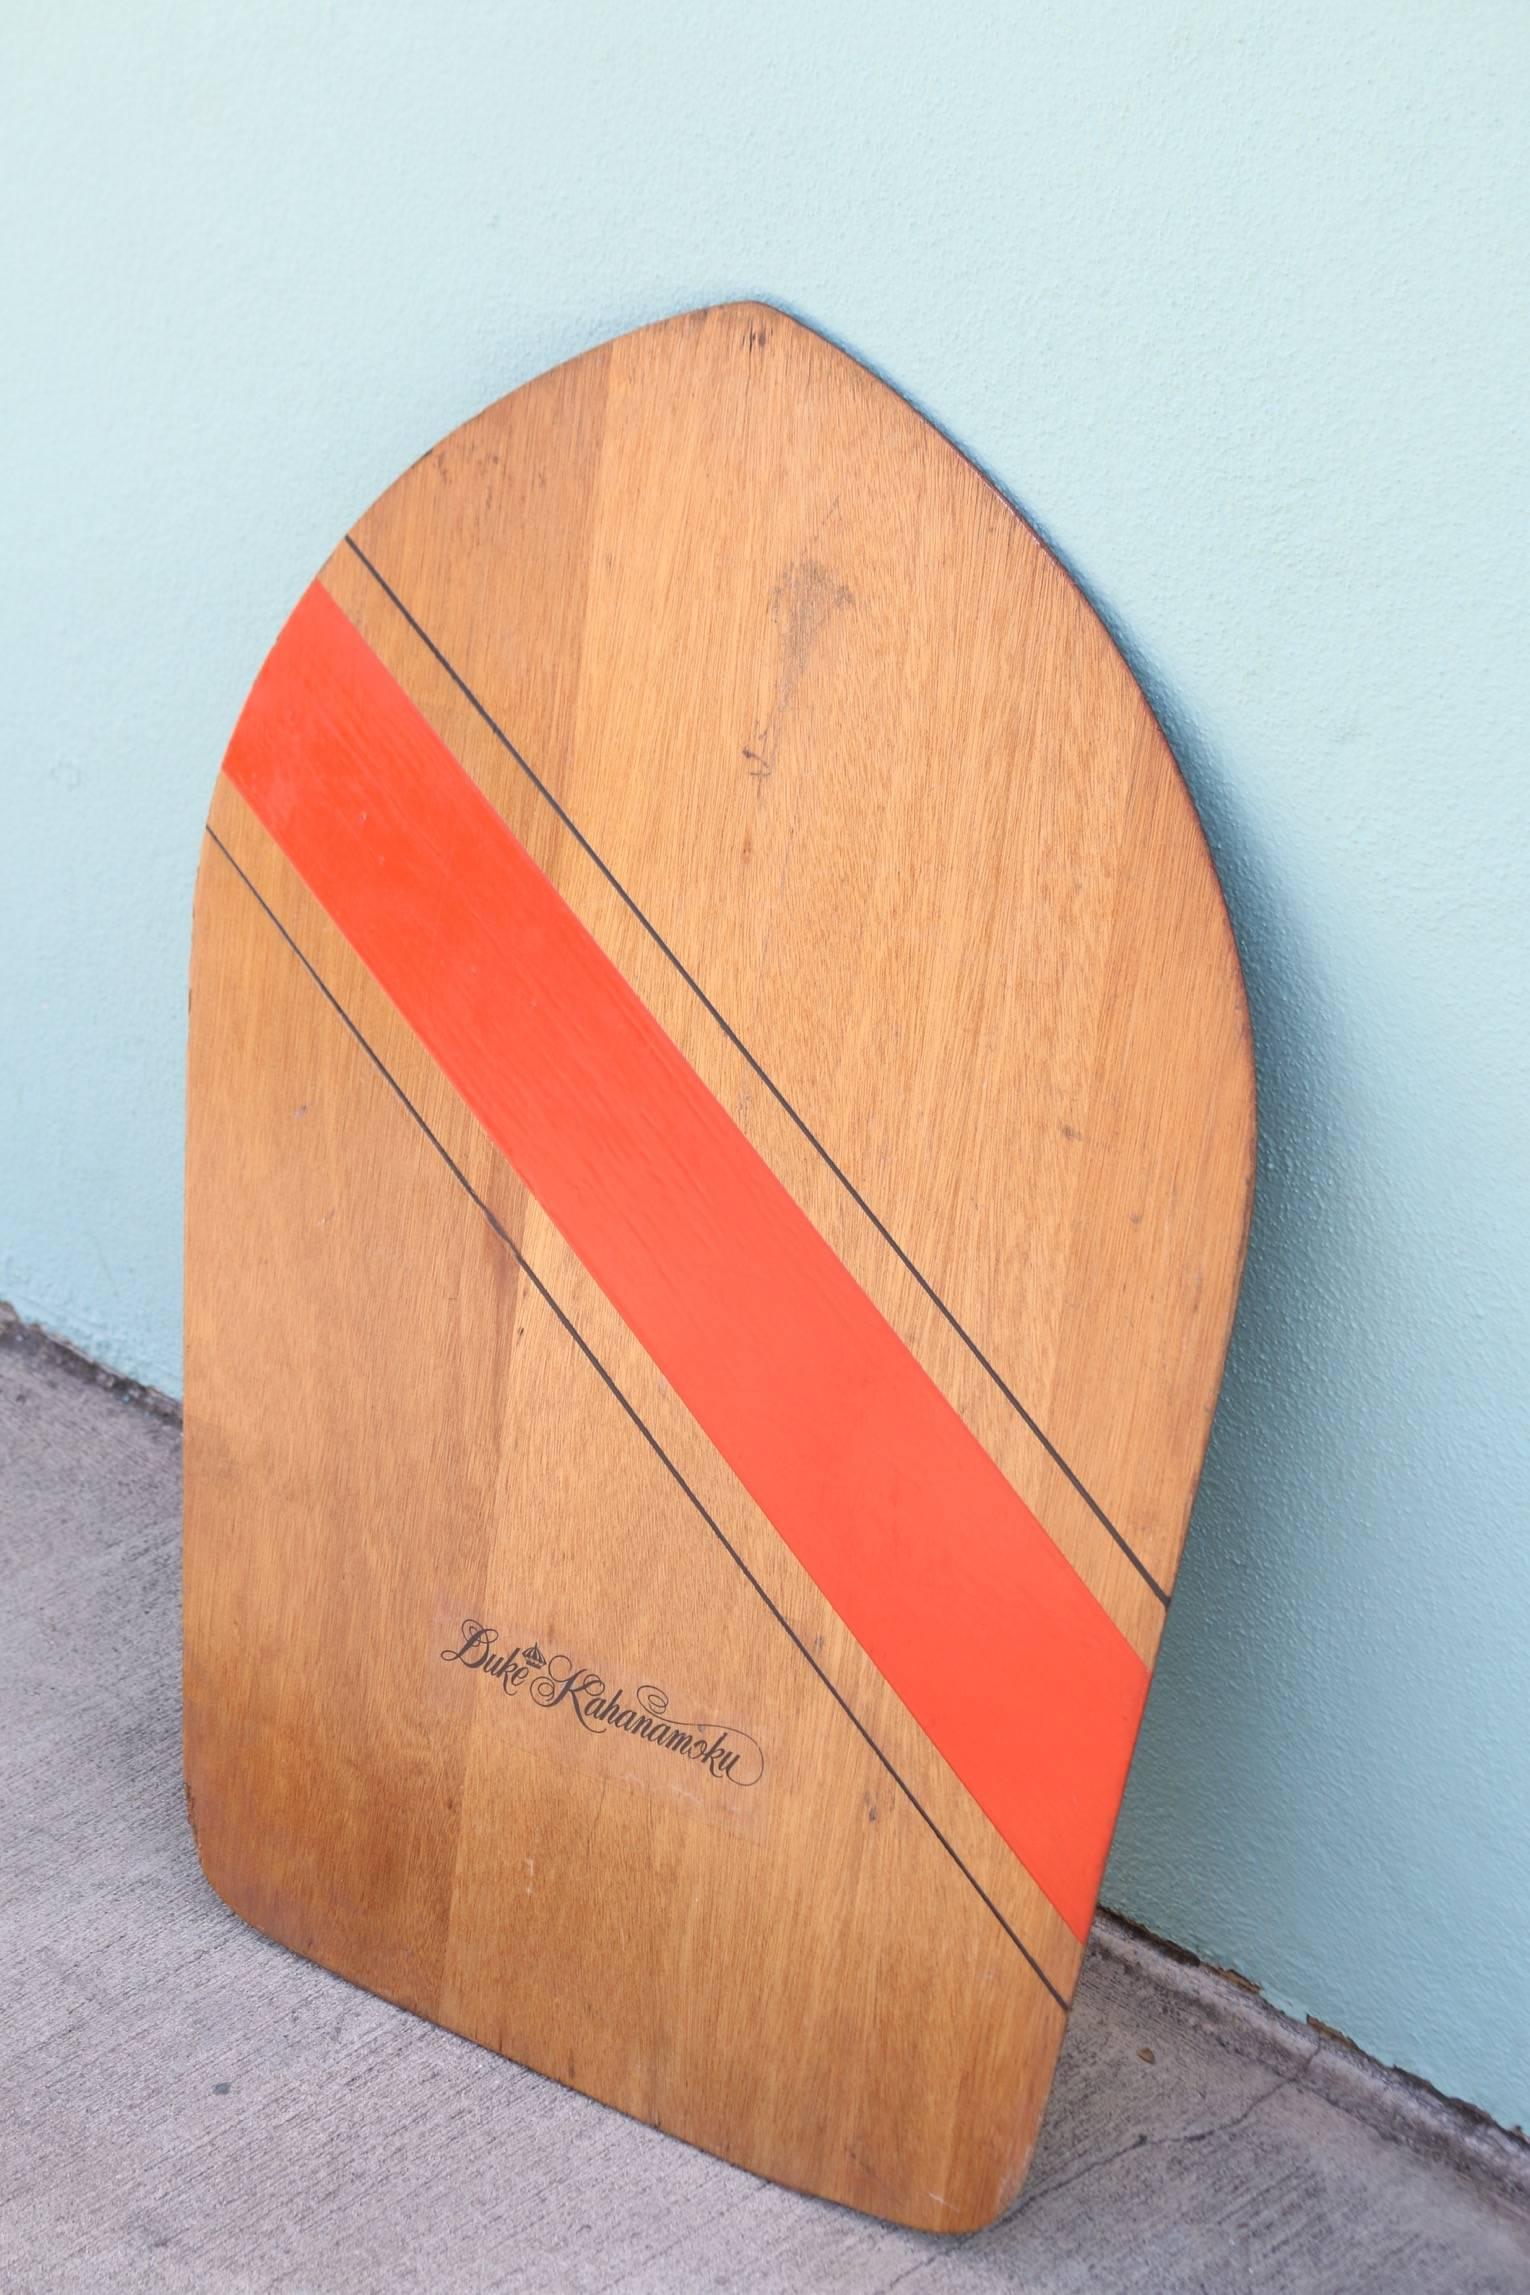 Duke Kahanamoku Skimboard, Wood, circa 1960s, Original  
In amazing original vintage condition, this Duke skimboard is one of the rarest of the Duke Kahanamoku Collectibles and a winner for collectors and decorators alike. This is the first of